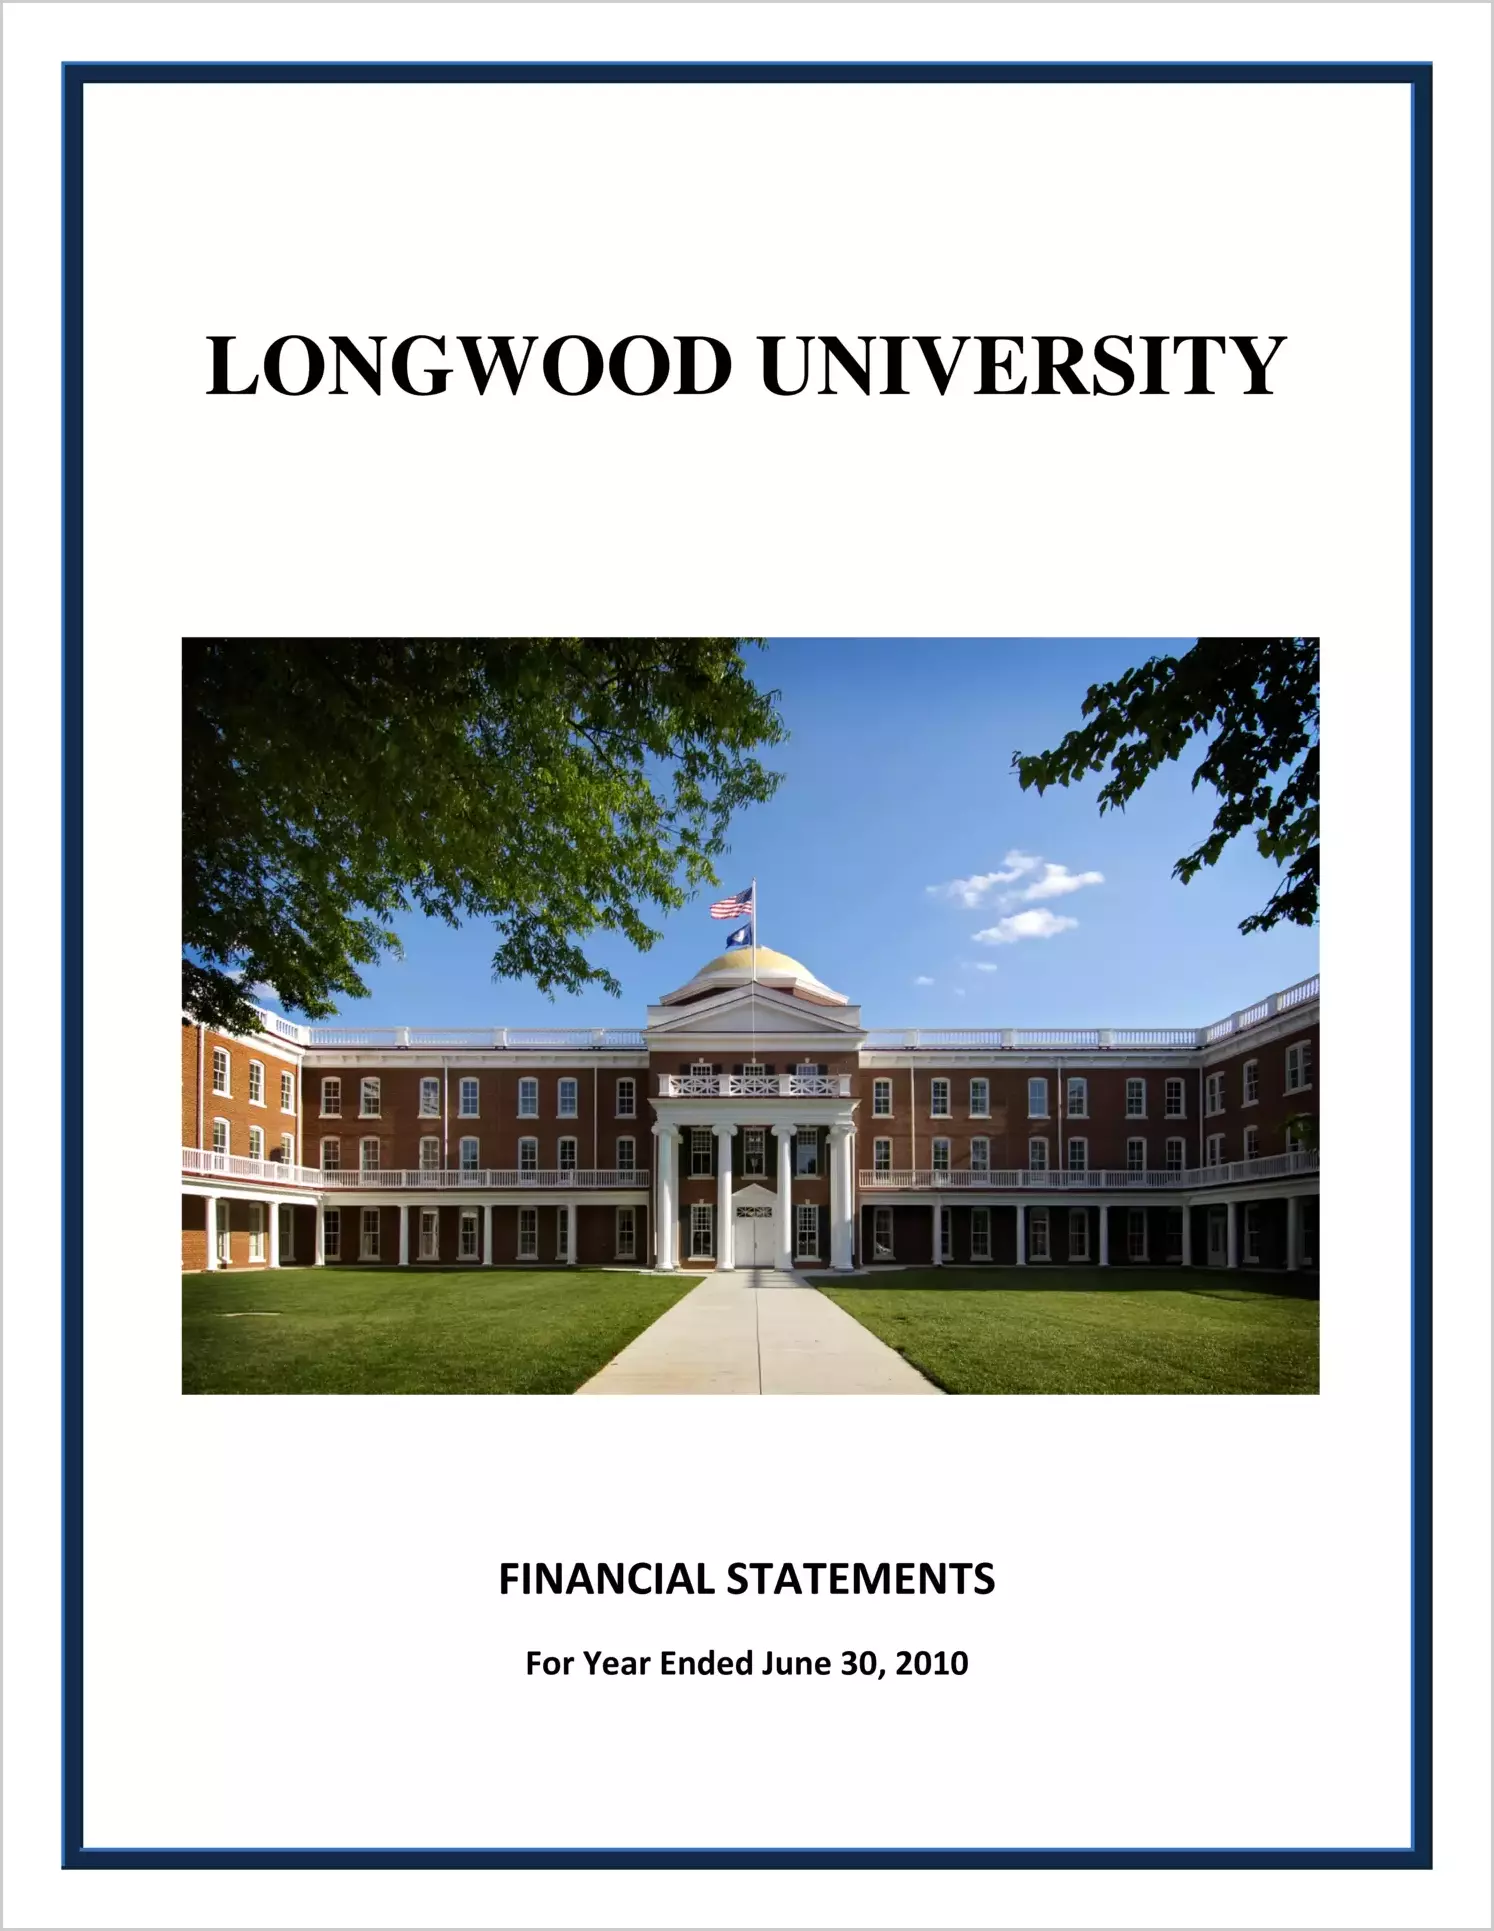 Longwood University Financial Statements report on audit for the year ended June 30, 2010